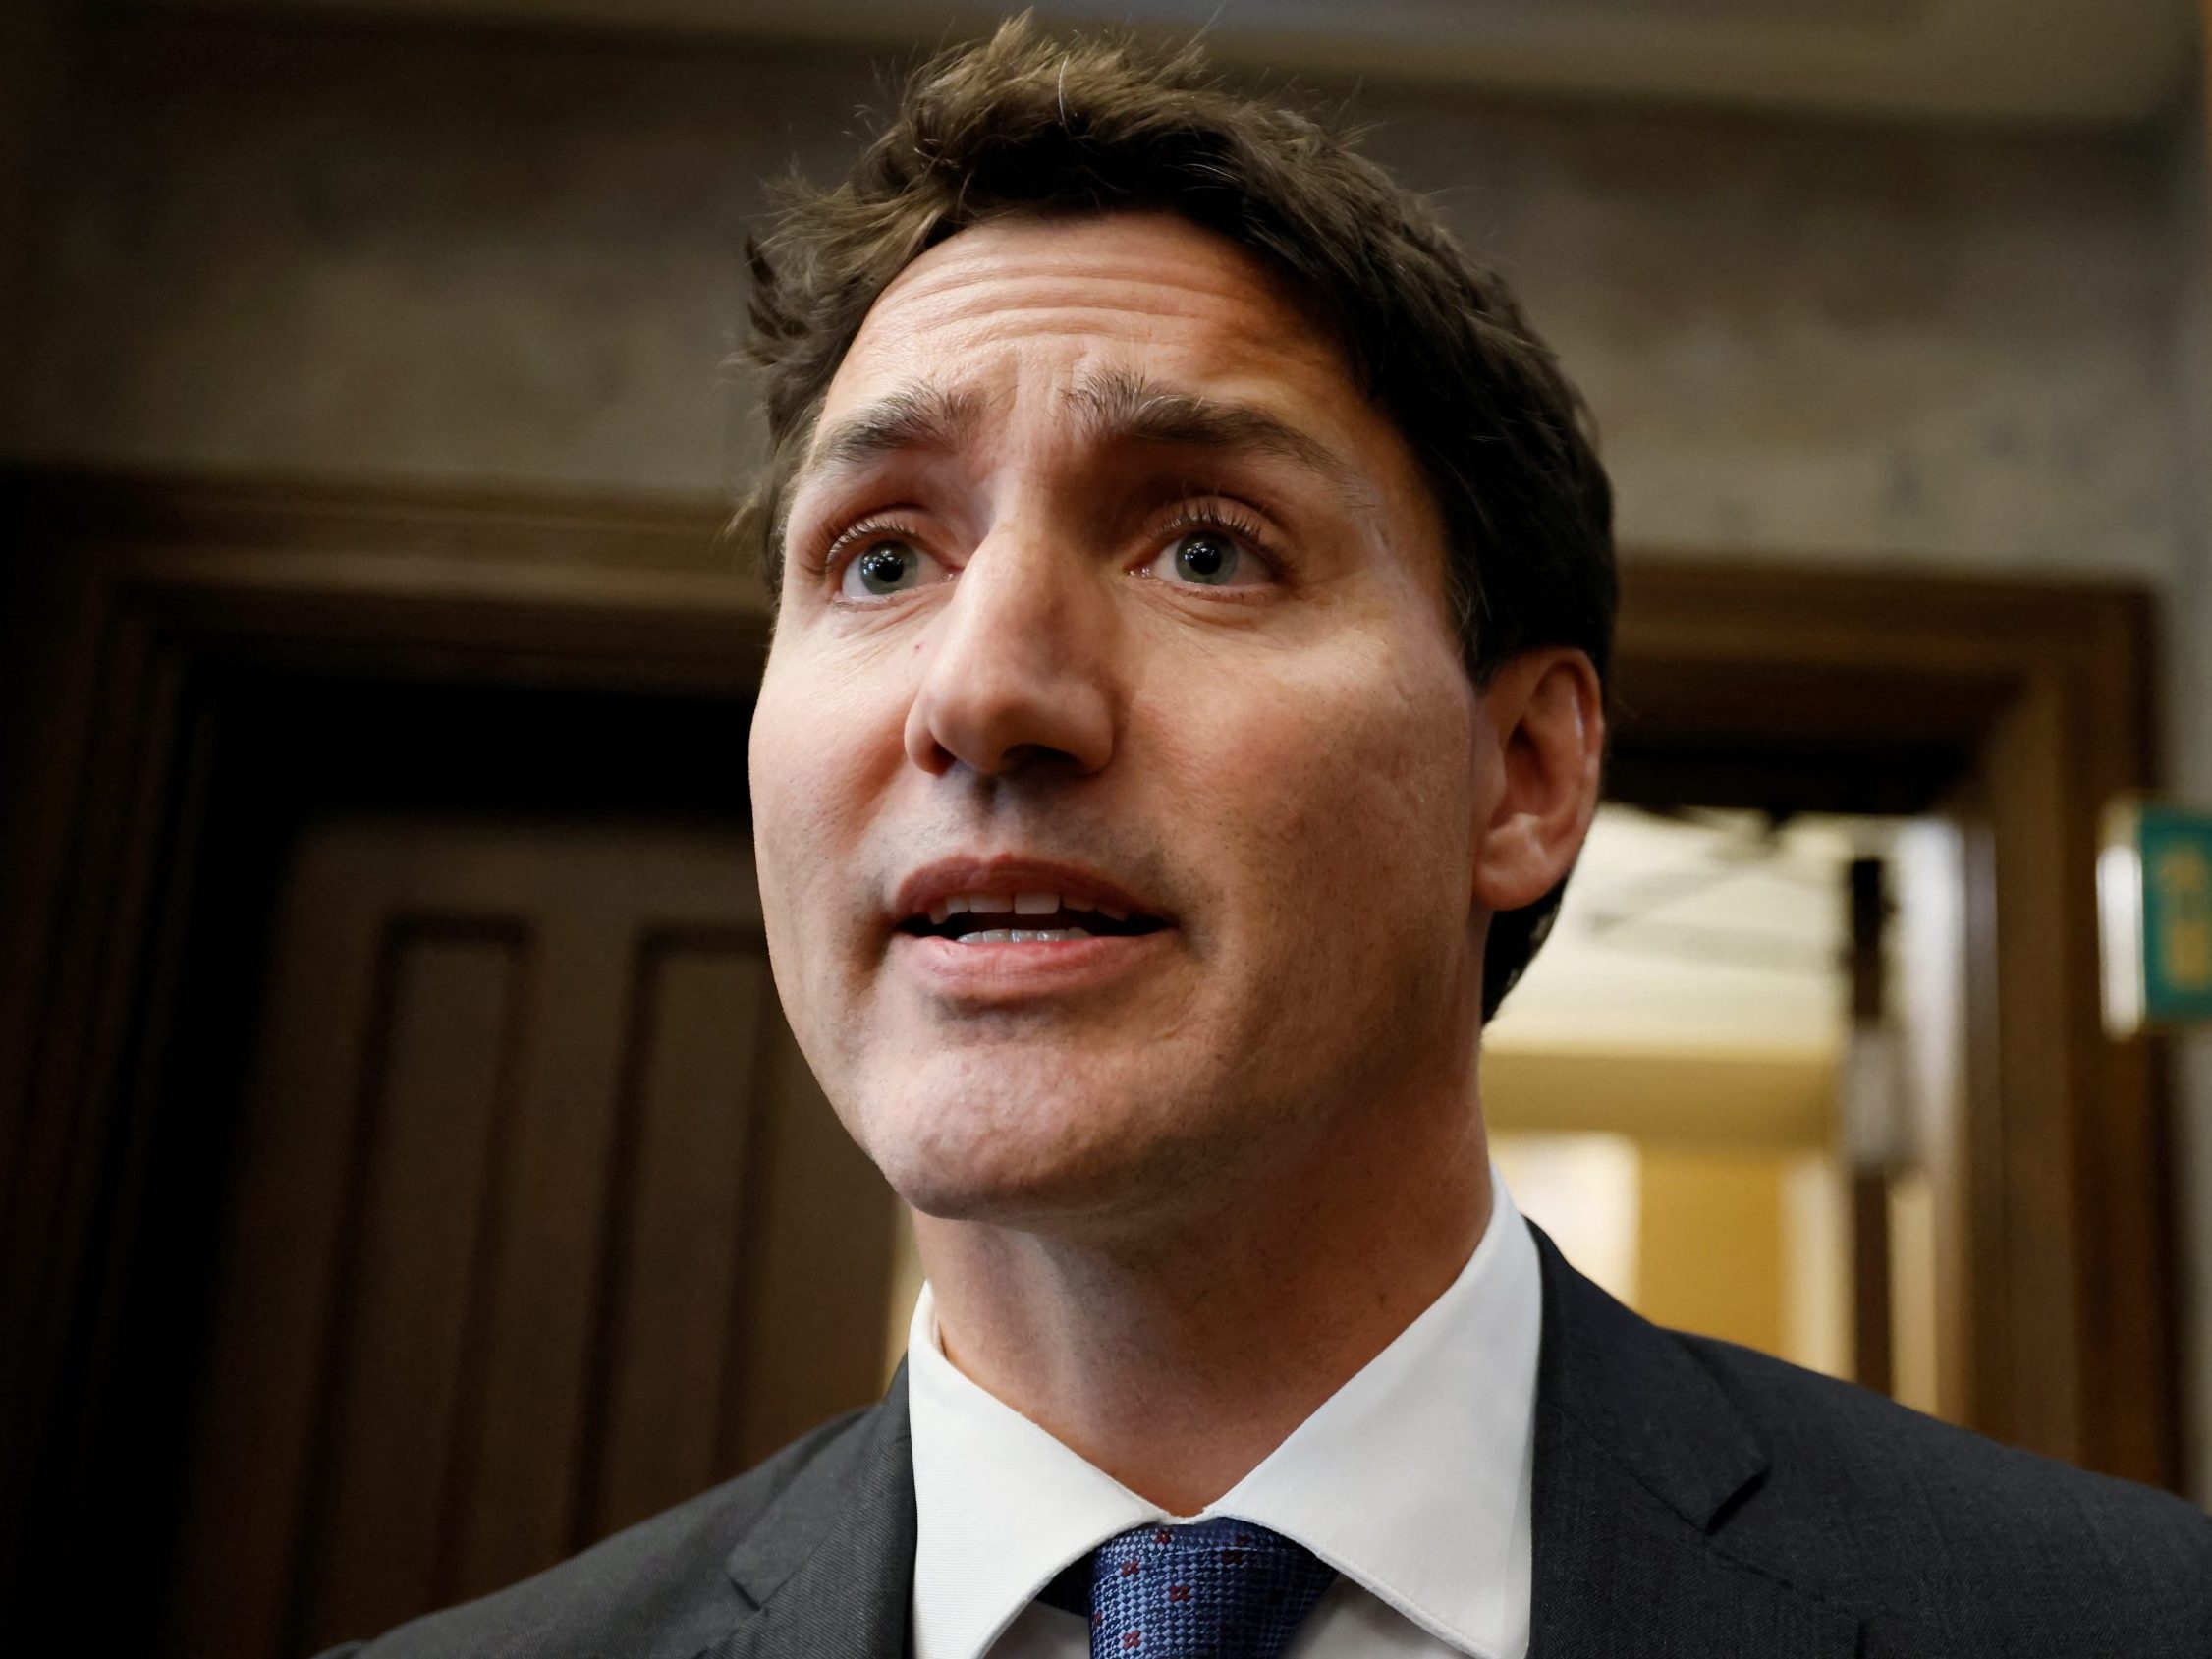 EDITORIAL: Yes, Trudeau is raising taxes